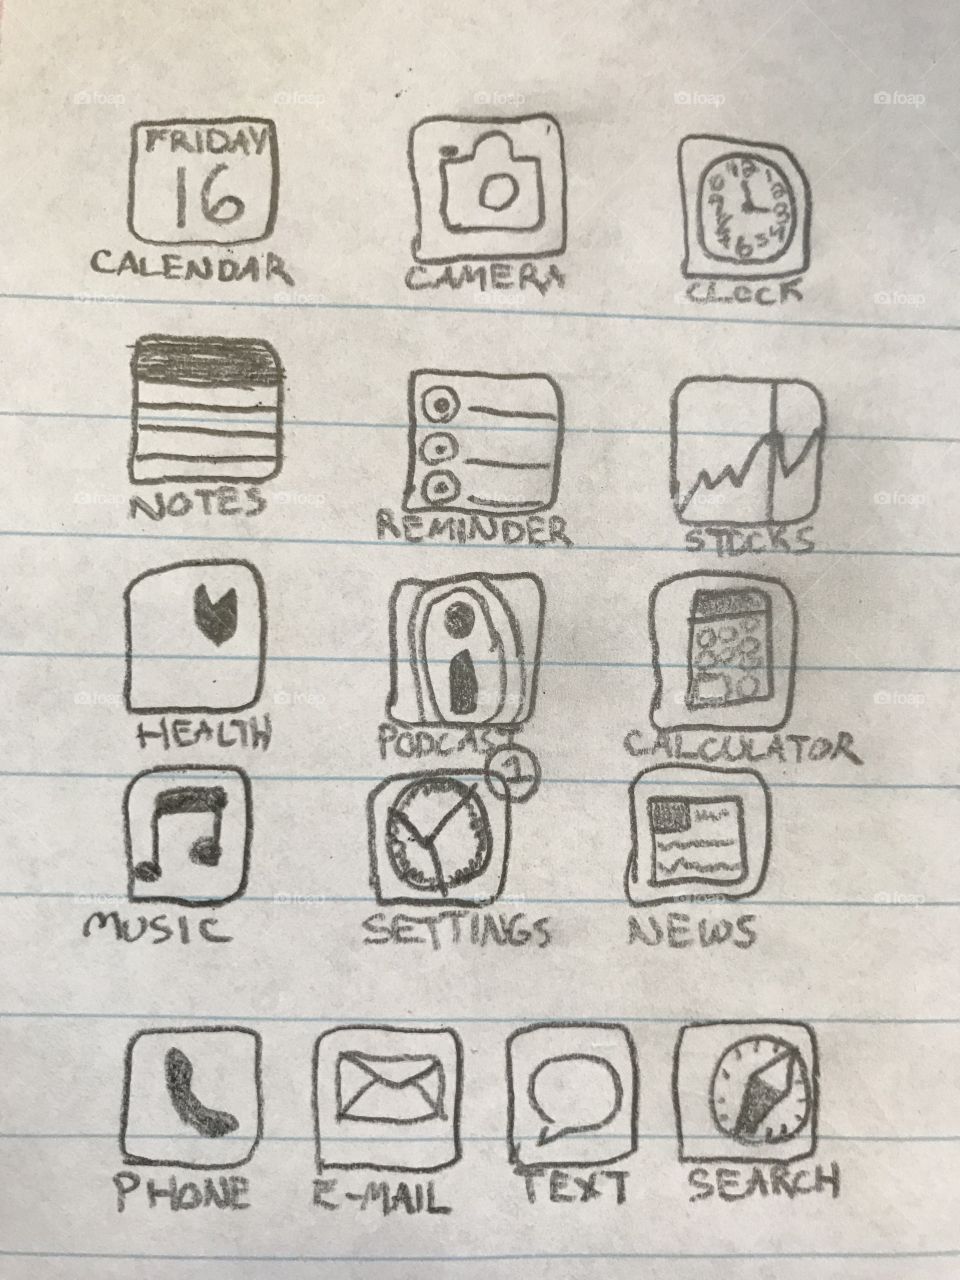 Apps on the phone